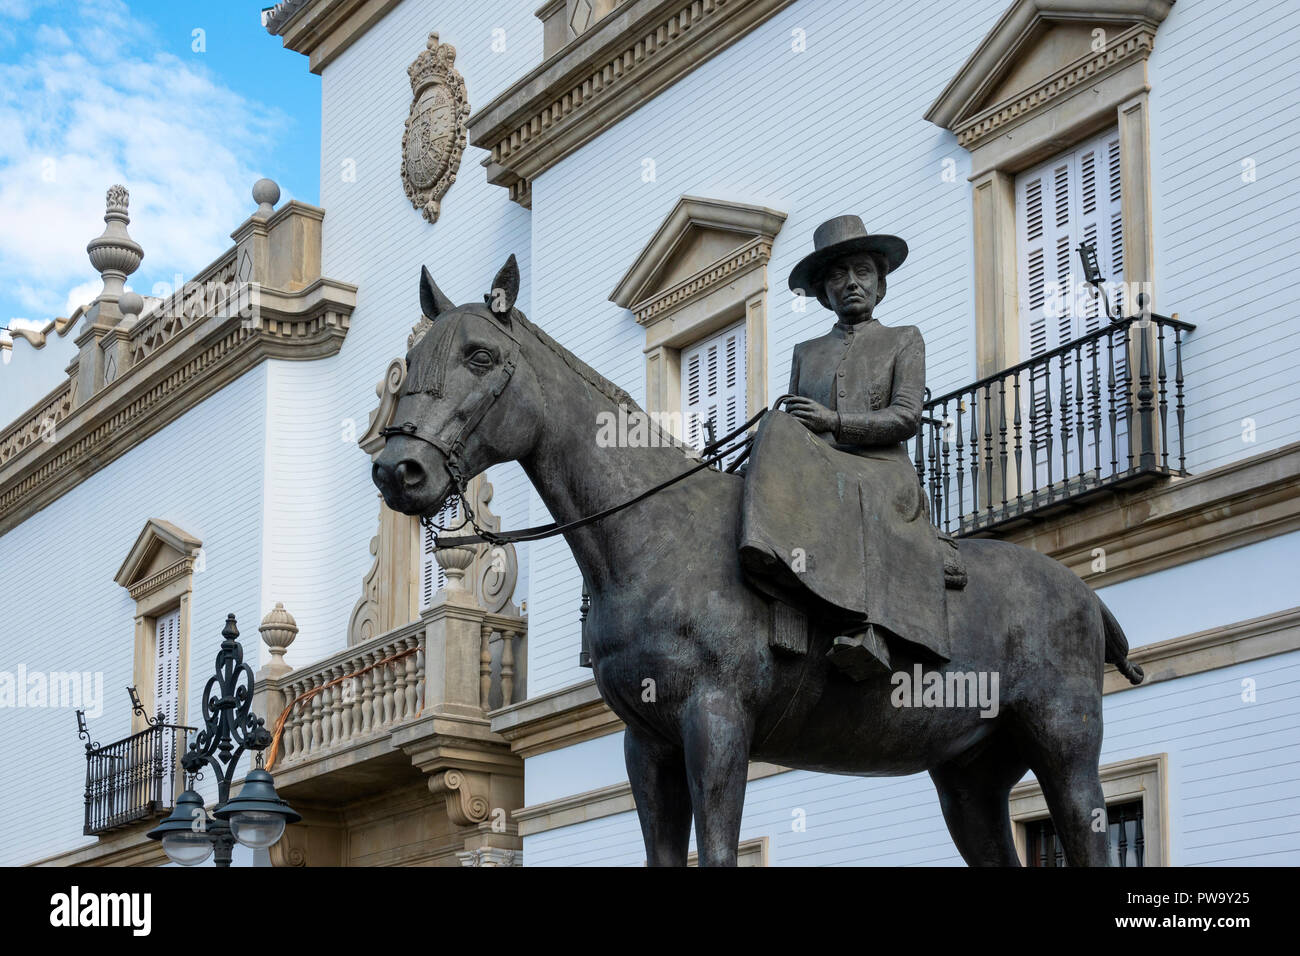 Outside the Seville bullring is this statue of Condesa De Barcelona mounted sidesaddle on a horse. Seville, Andalusia, Spain Stock Photo